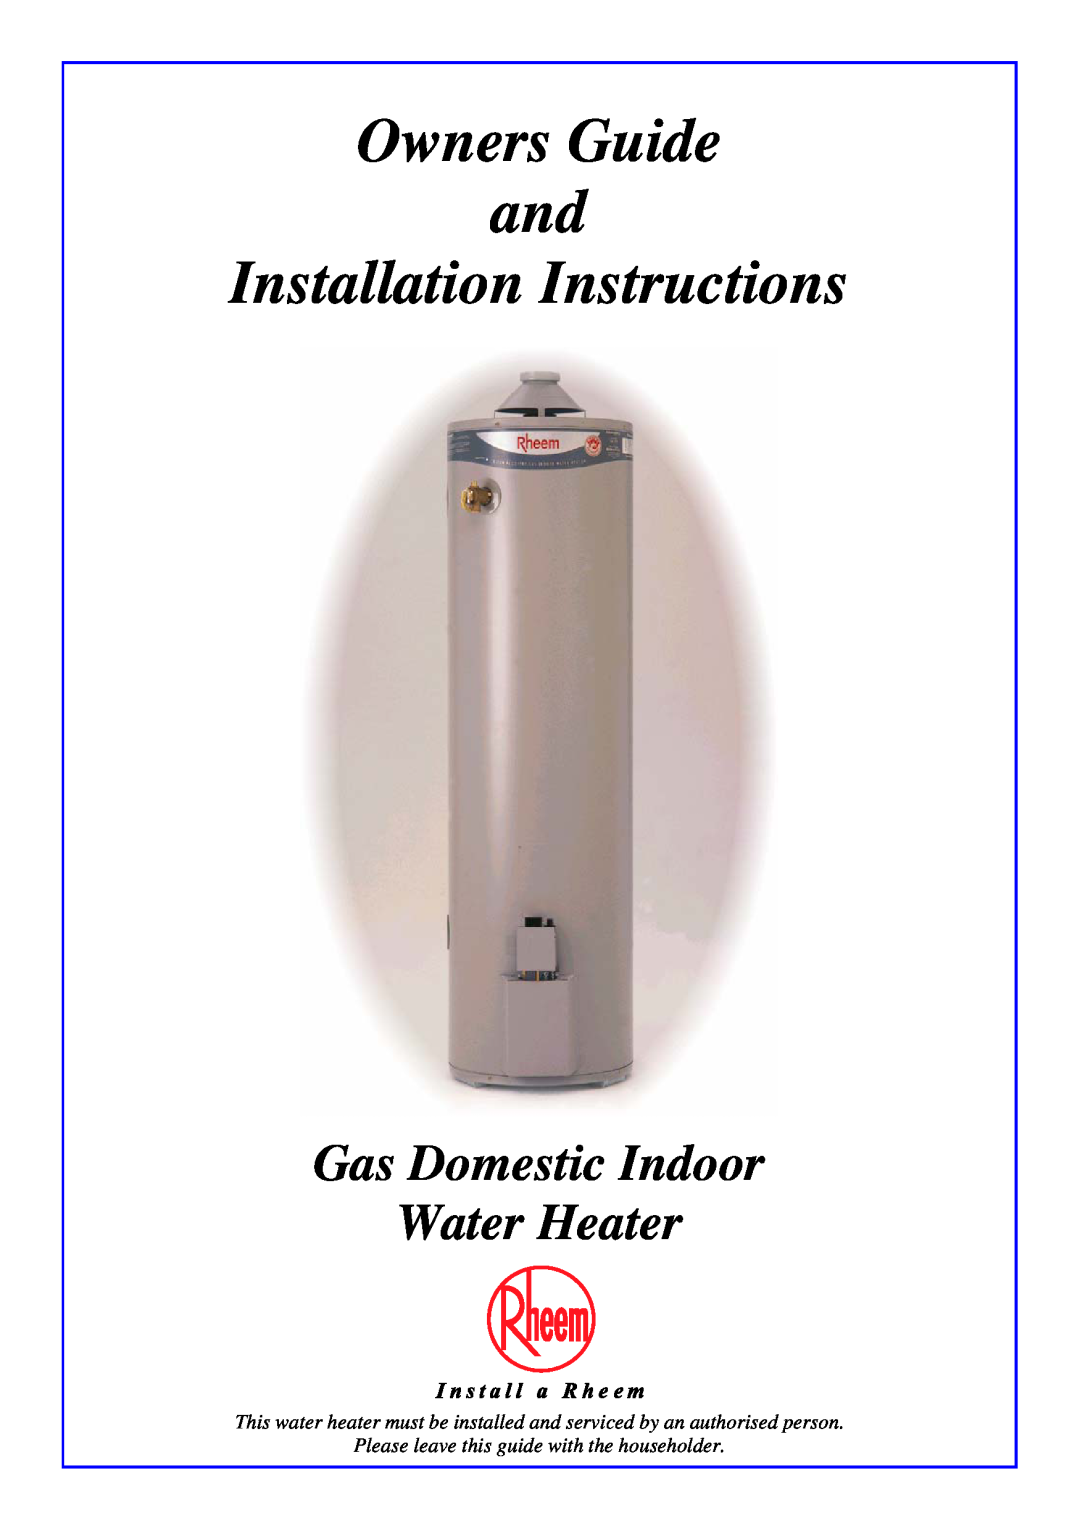 Rheem 300 series installation instructions Owners Guide and Installation Instructions, Gas Domestic Indoor Water Heater 